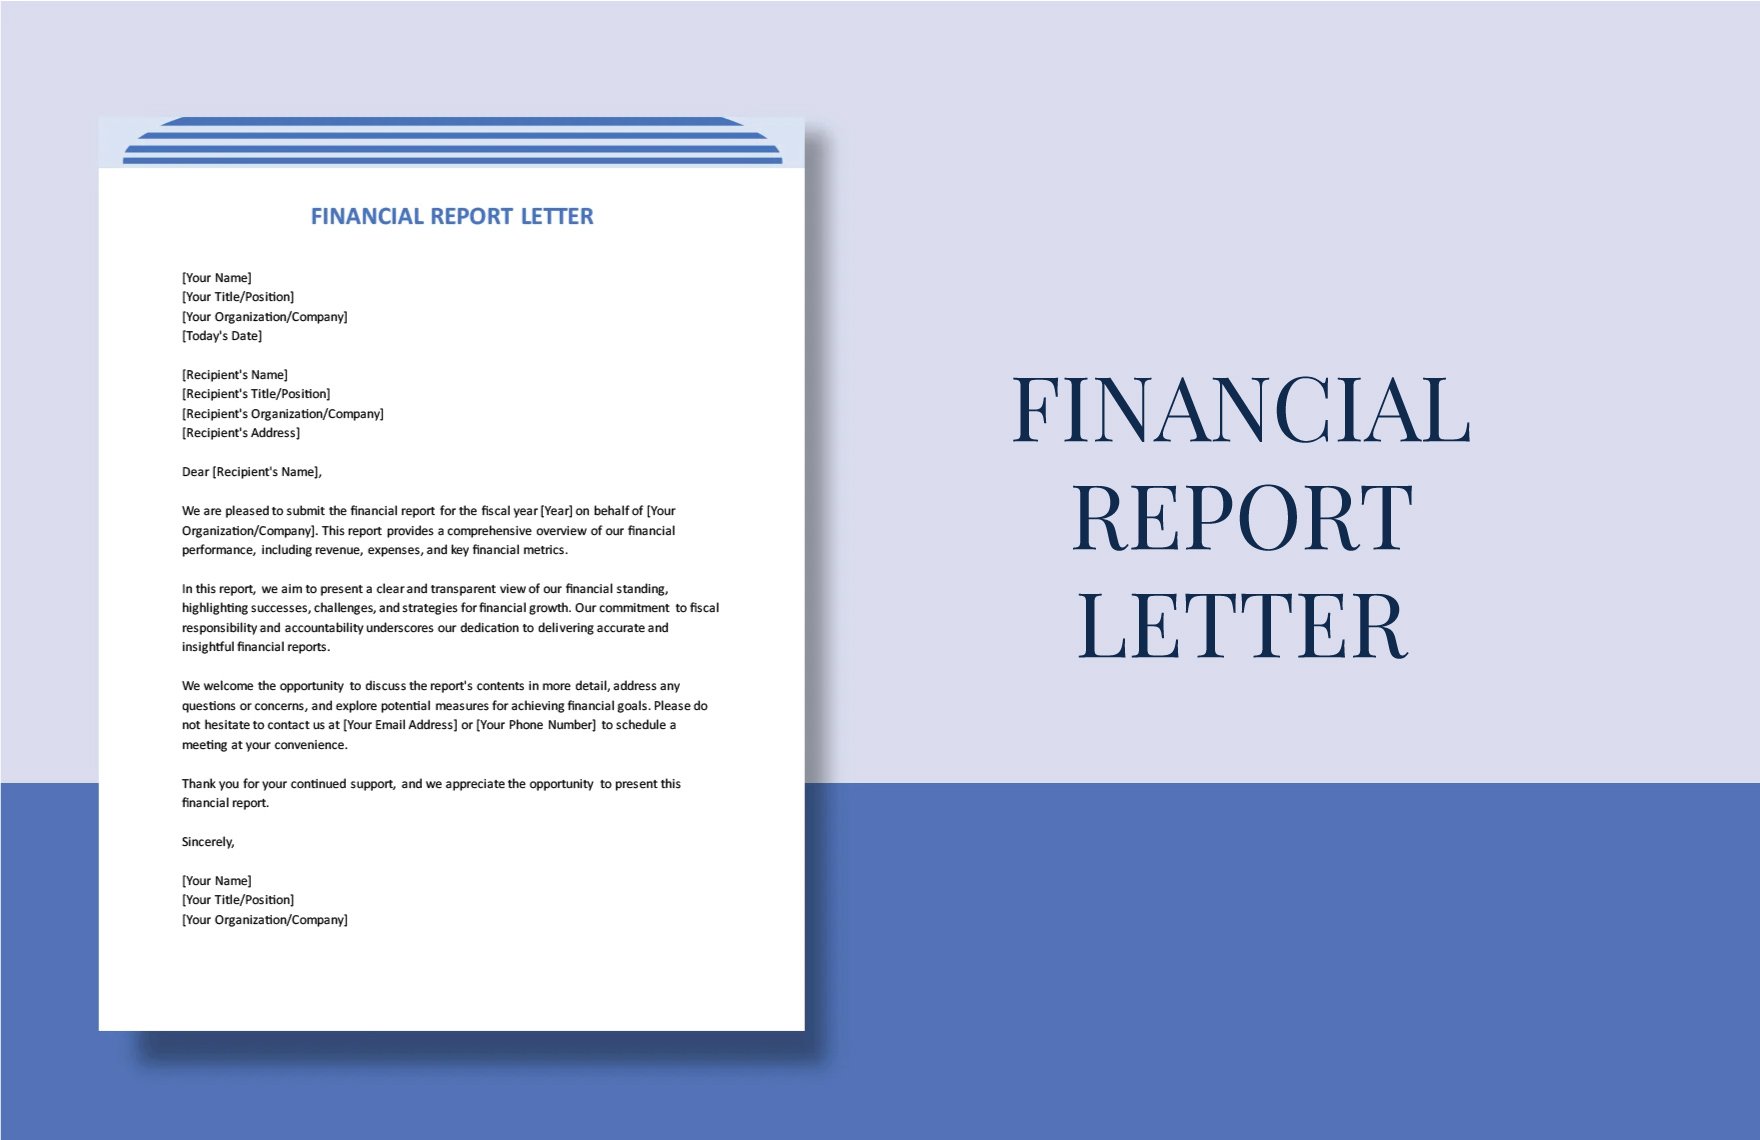 Financial Report Letter in Word, Google Docs, PDF